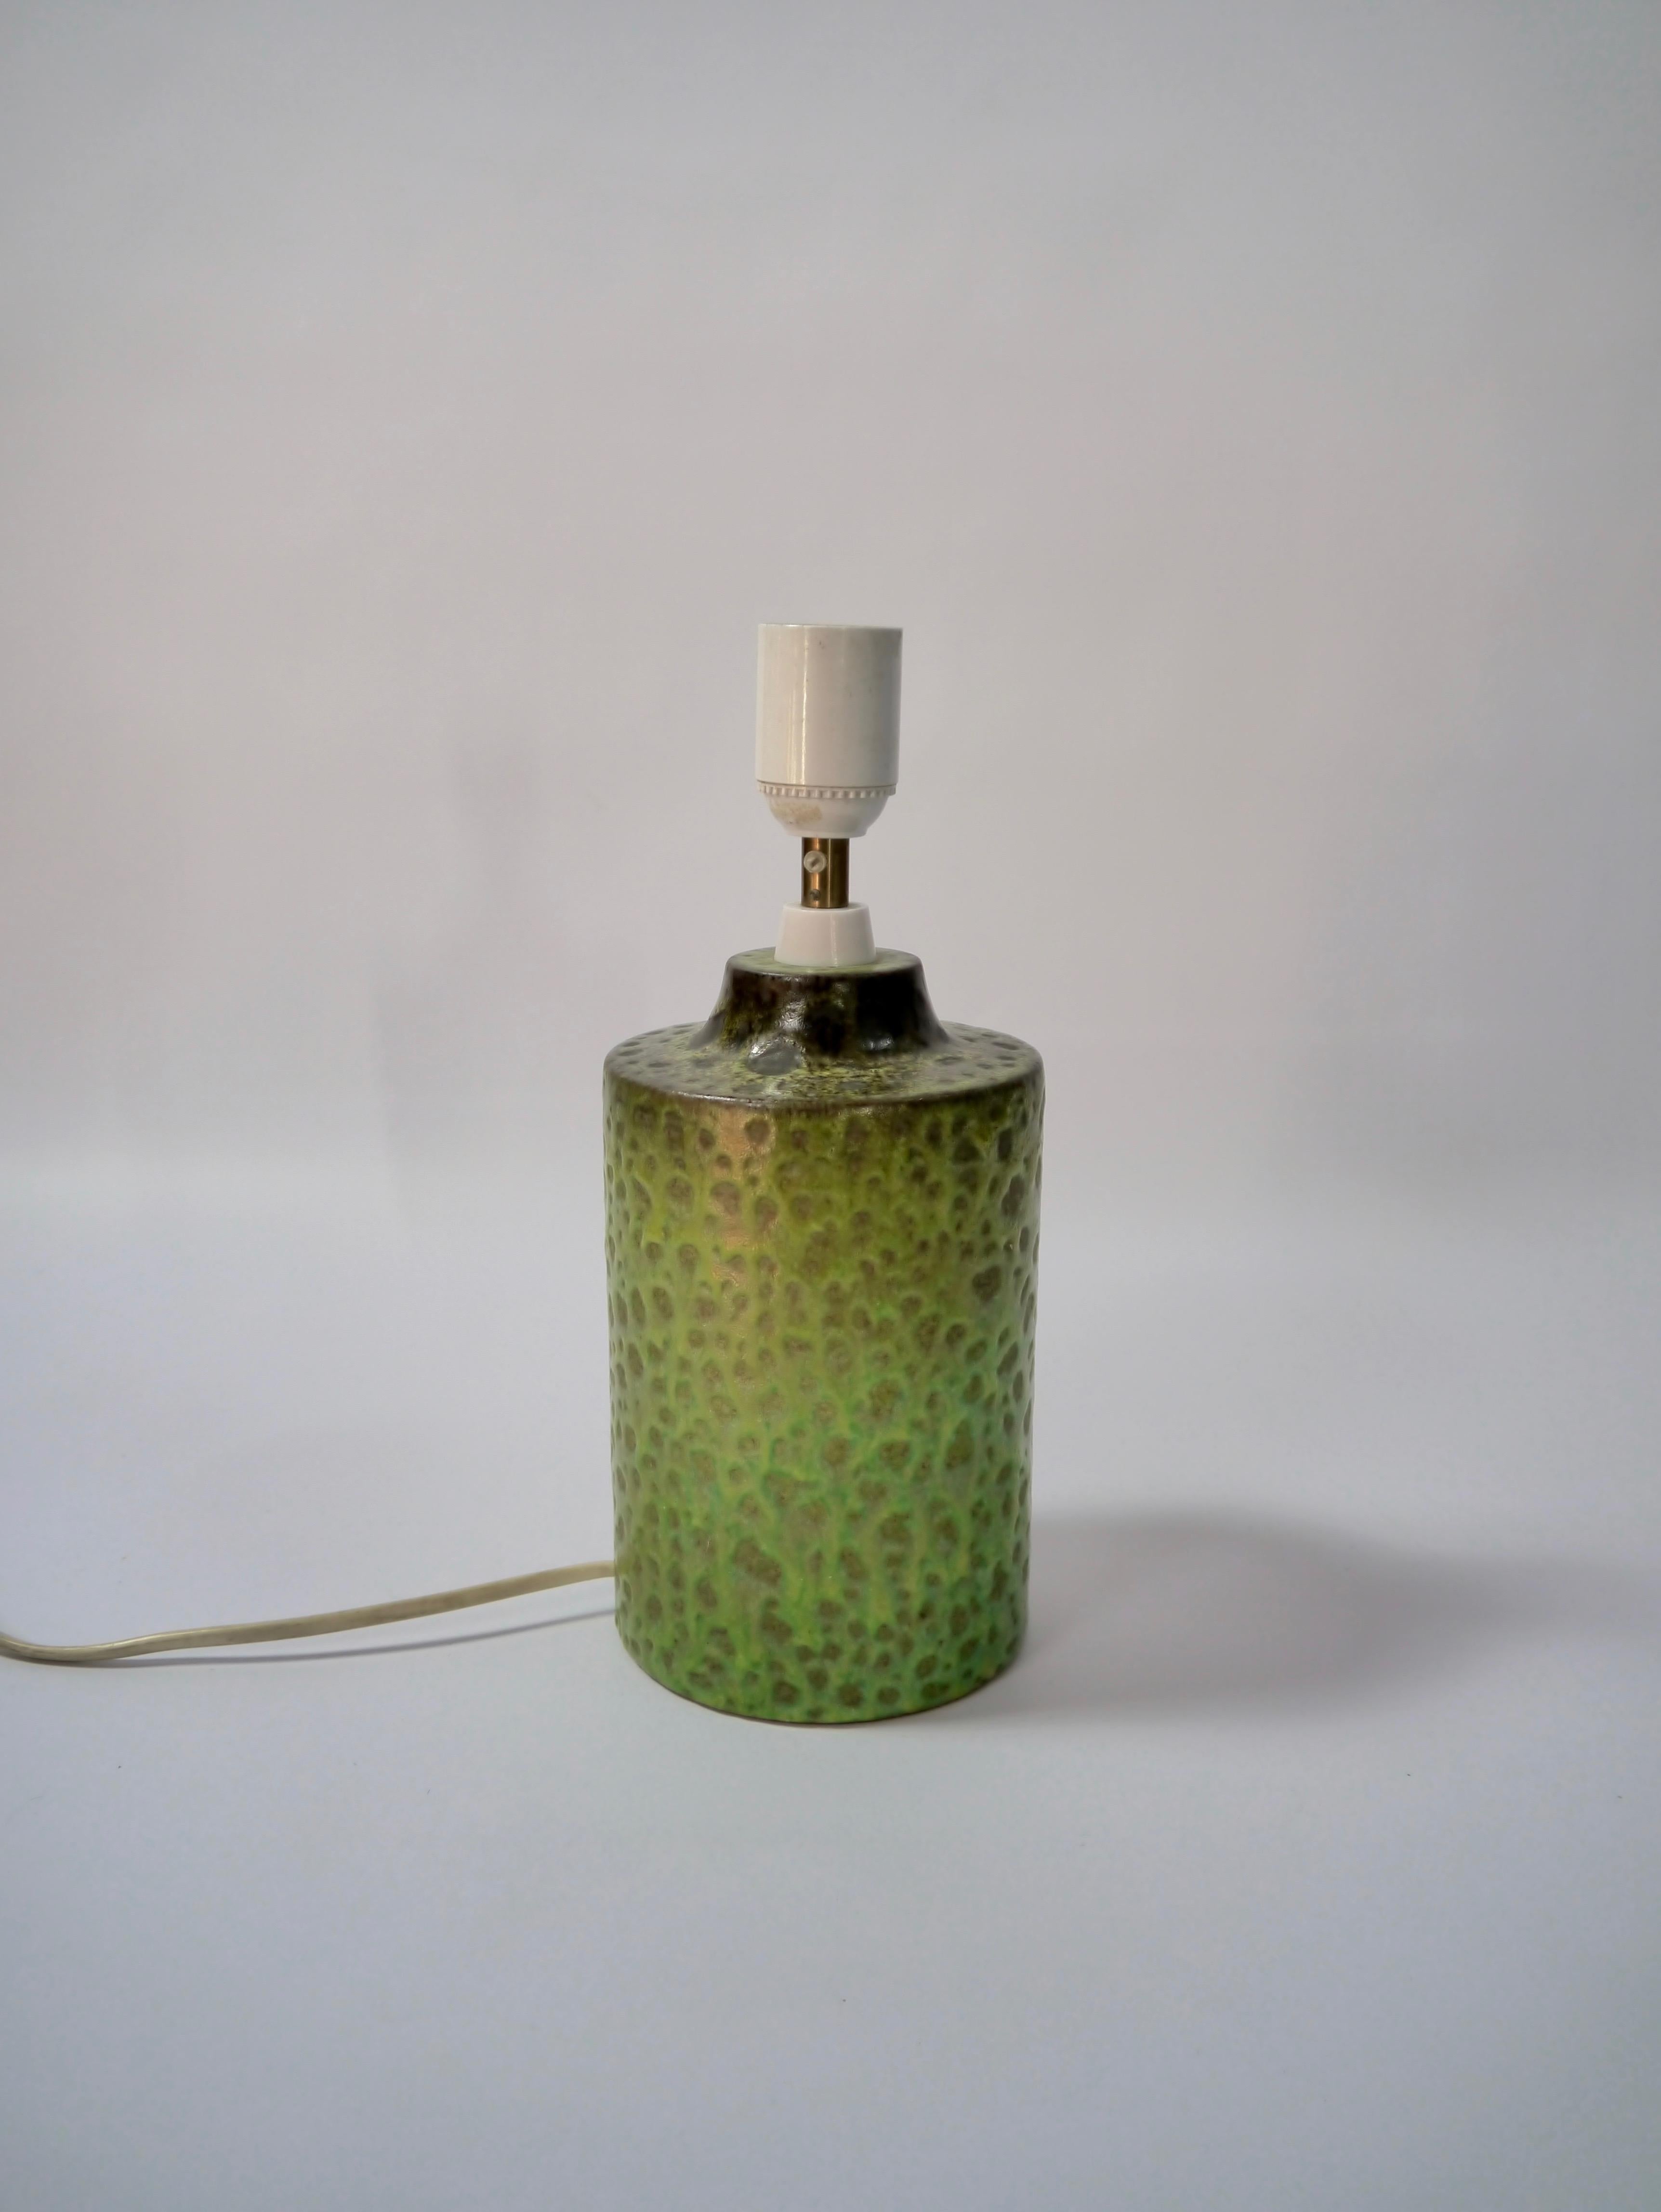 Ceramic table lamp by Bitossi, Italy, 1960s. Striking animalesque spotted pattern in different shades of green.